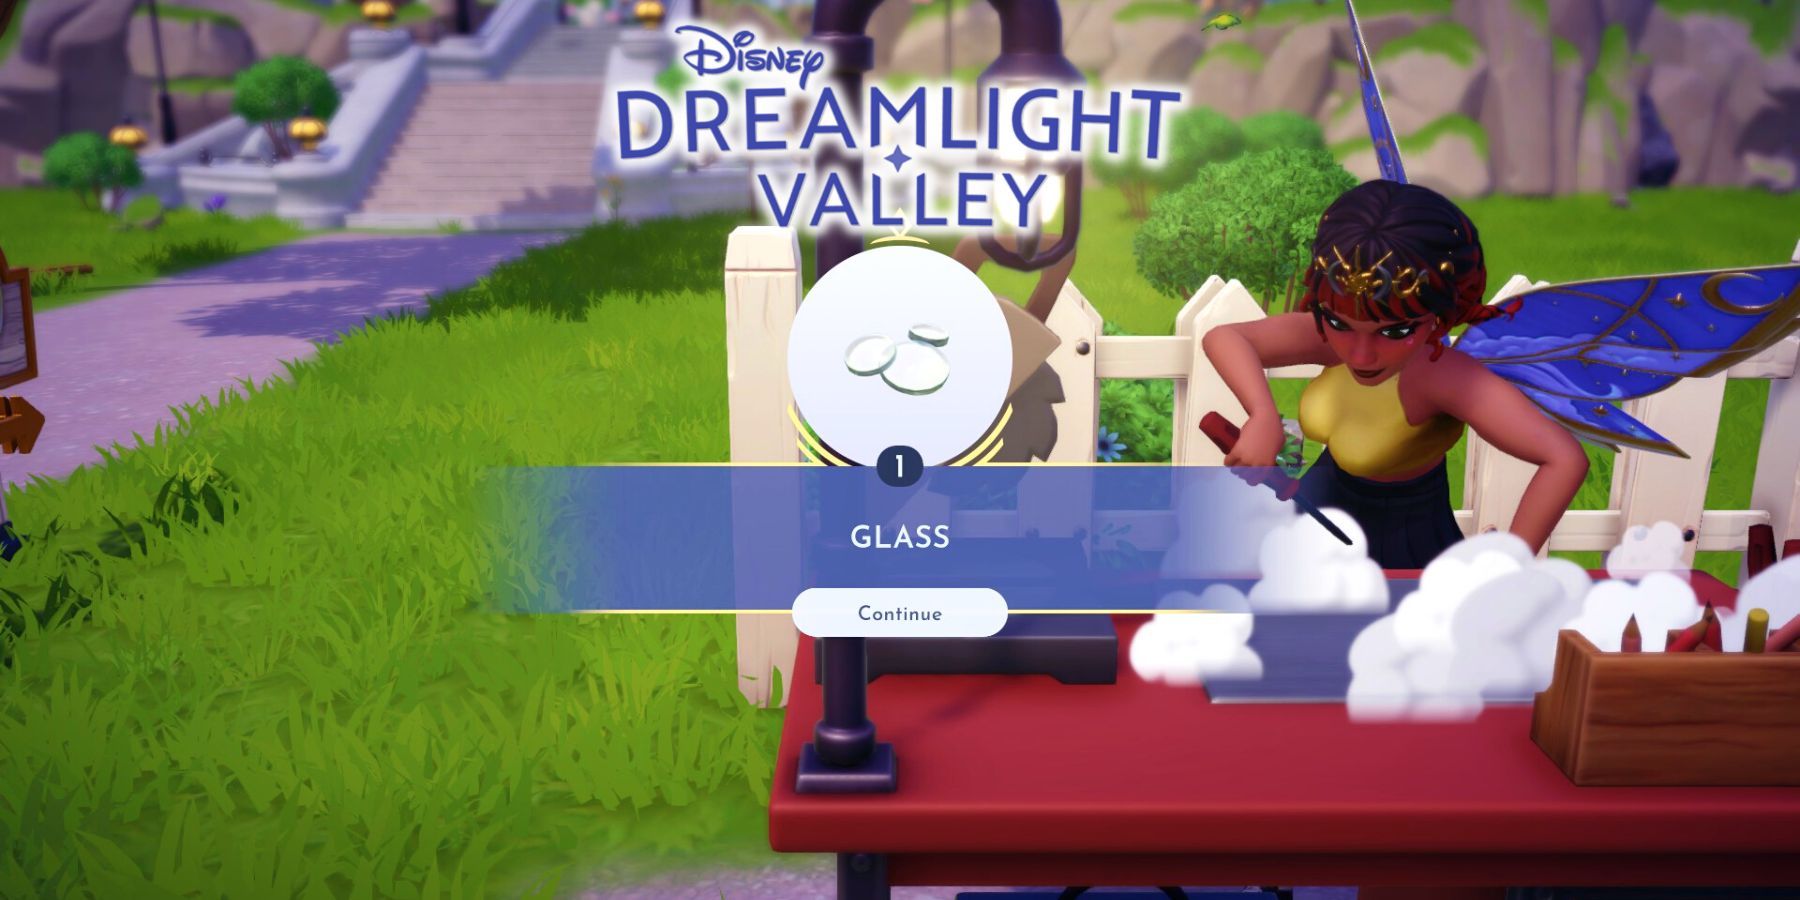 Disney Dreamlight Valley: How to Get Glass